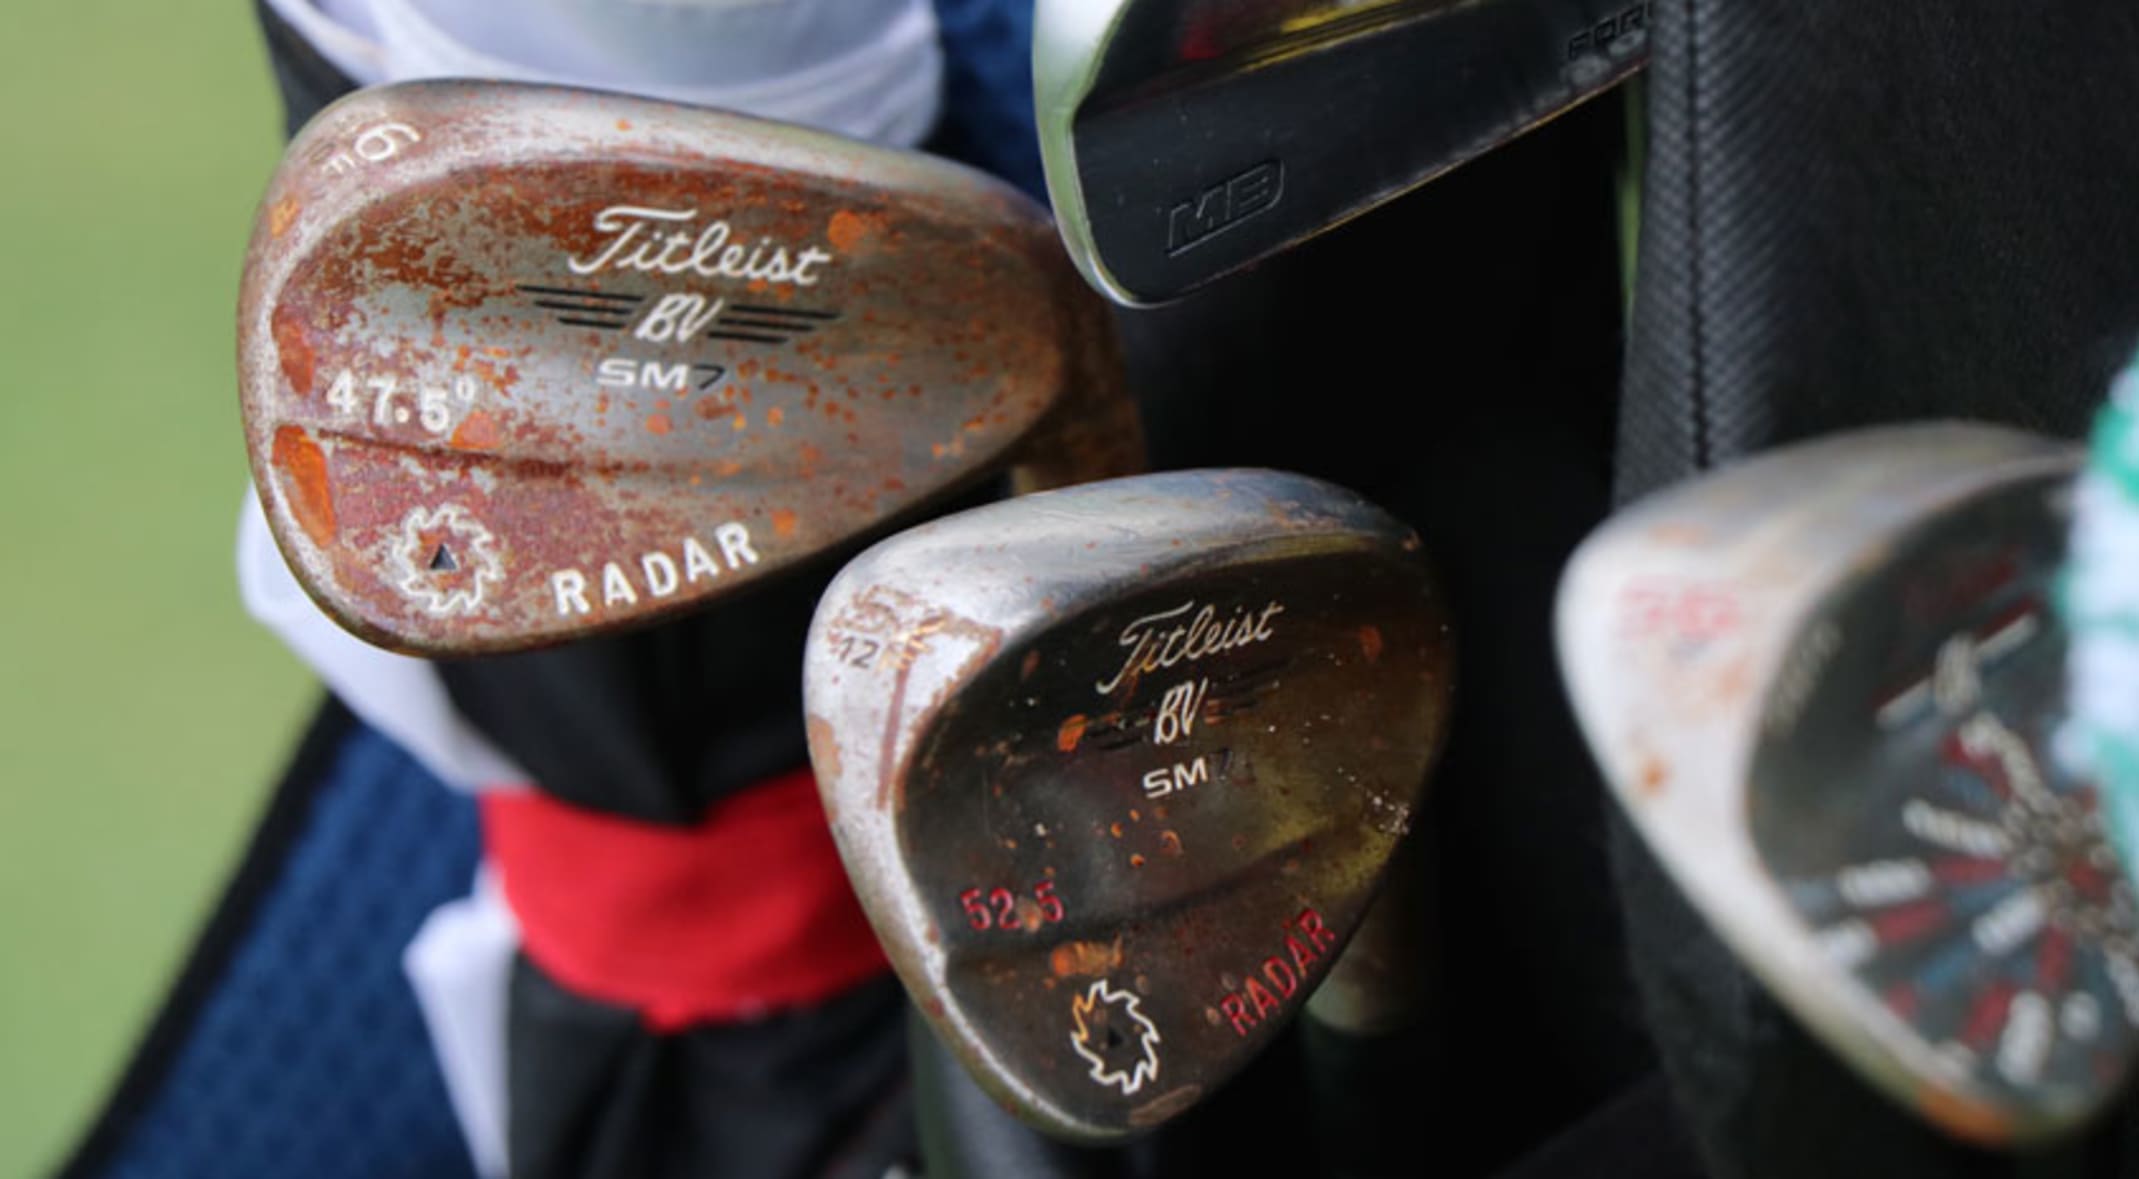 Why JT has 'radar' stamped on his wedges